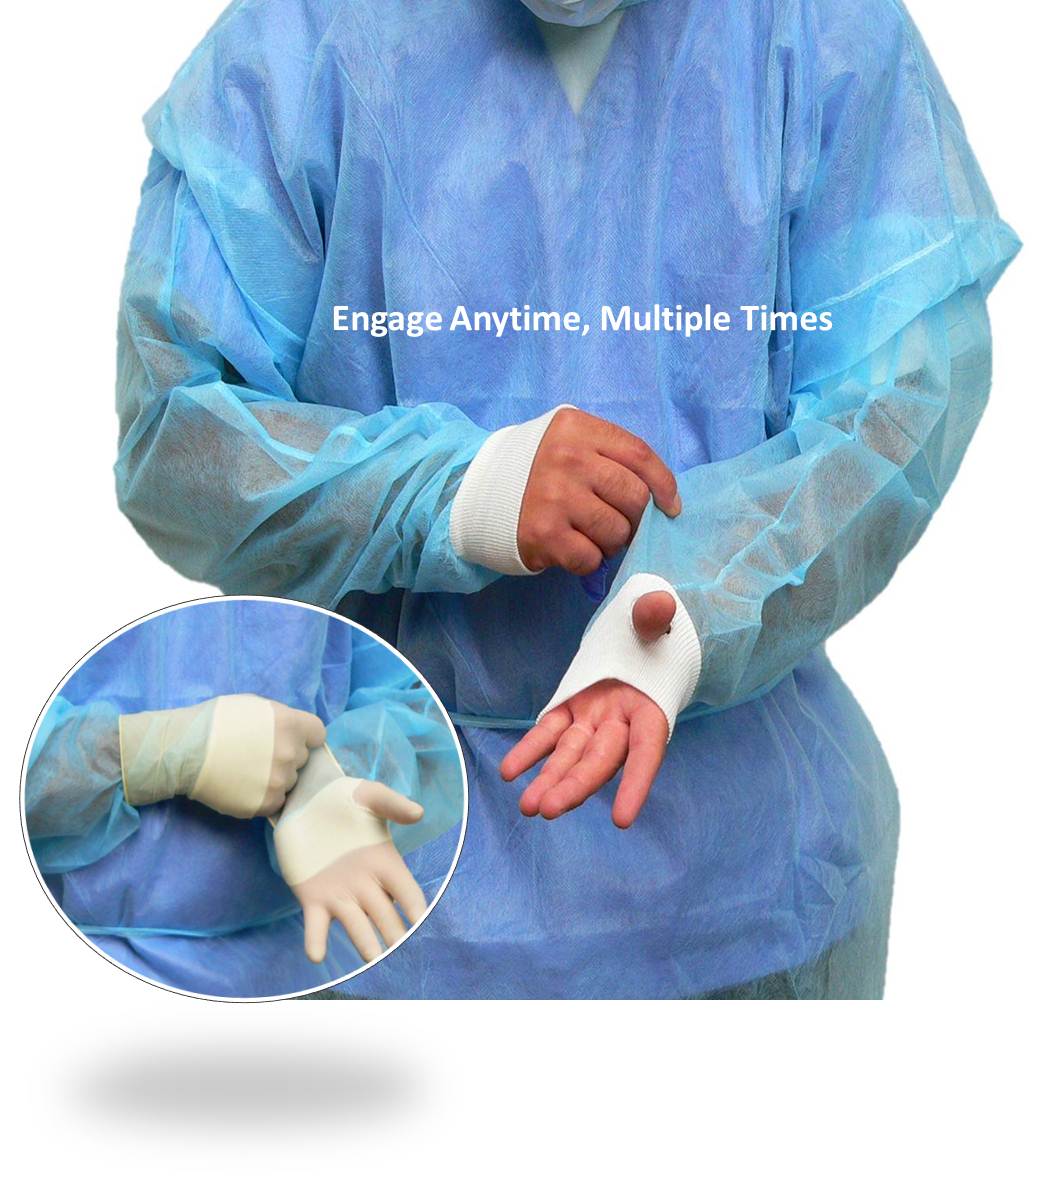 MDS Disposable Fluid Resistant Blue Polypropylene Isolation Gowns w/ optional WRIST-SHIELD™ Thumb Slit Cuff Technology 